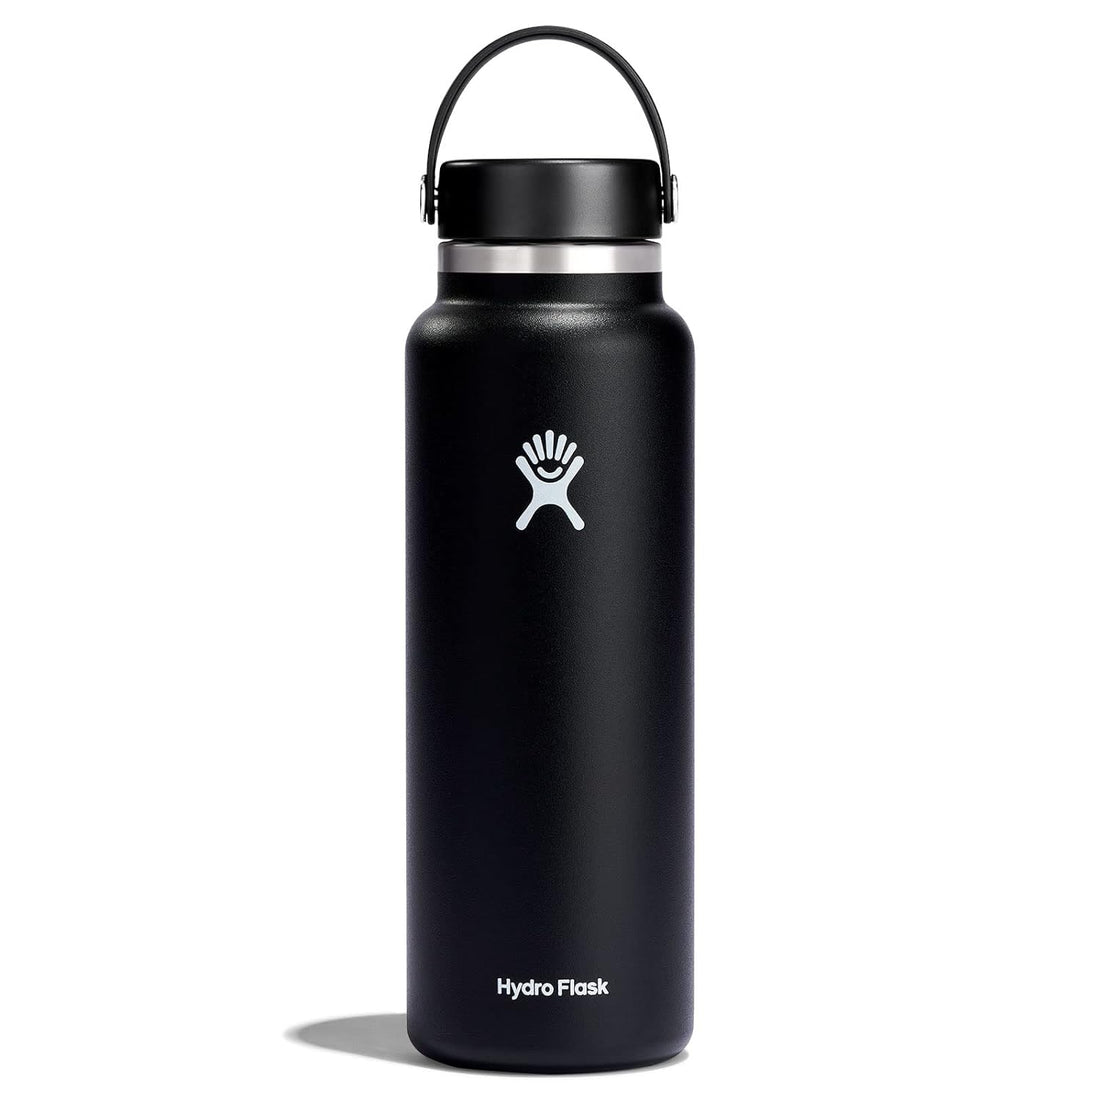 Hydro Flask Water Bottle - Stainless Steel & Vacuum Insulated - Wide Mouth 2.0 with Leak Proof Flex Cap - 40 oz, Black